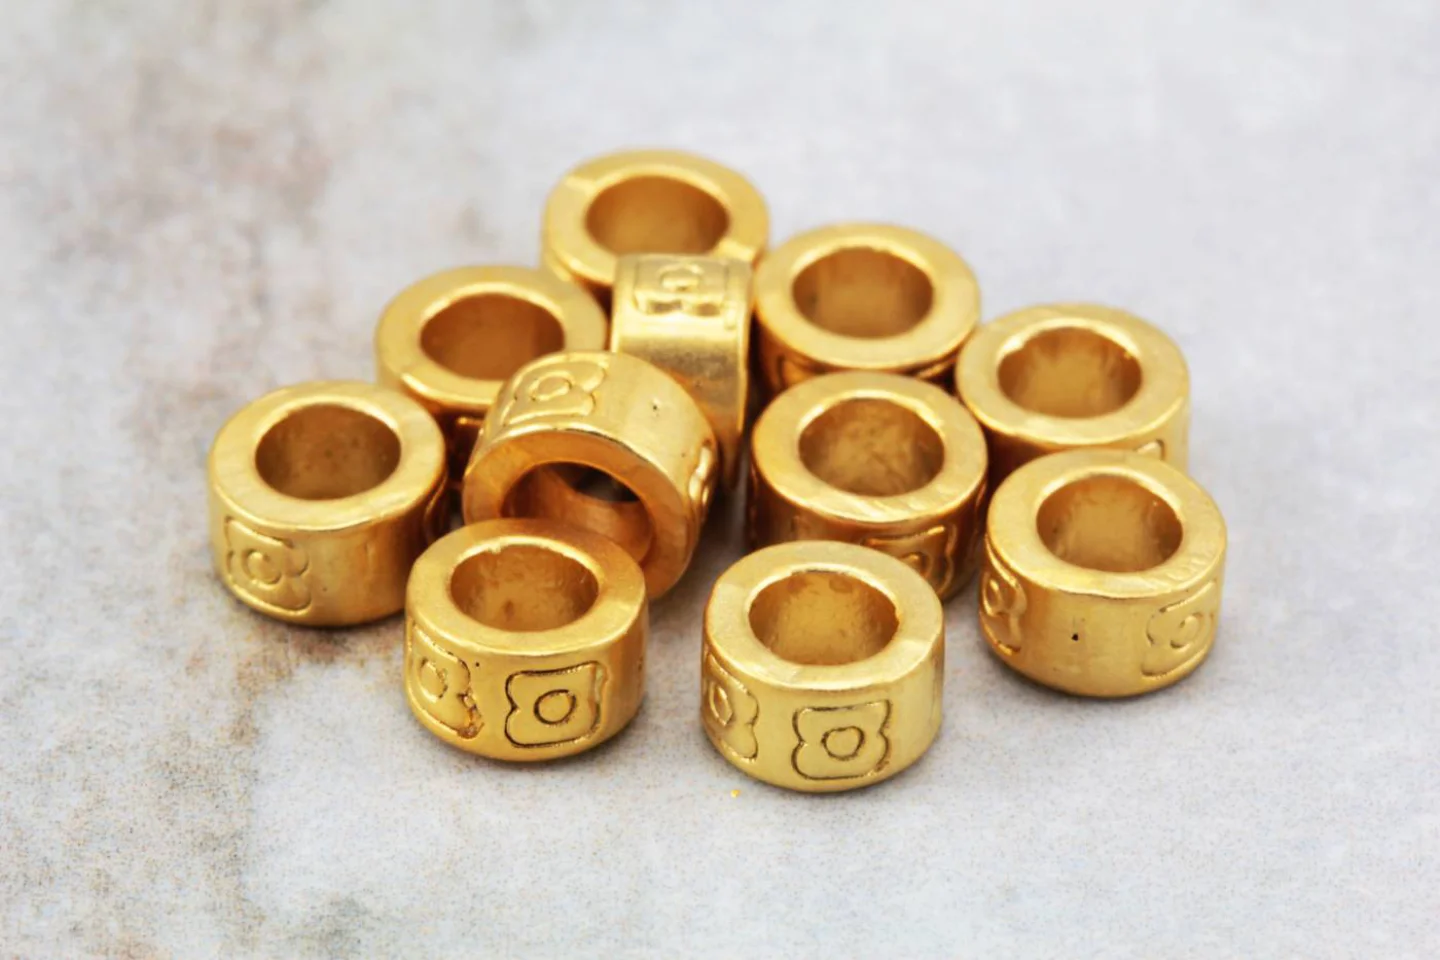 7mm-gold-plated-rondelle-spacer-beads.